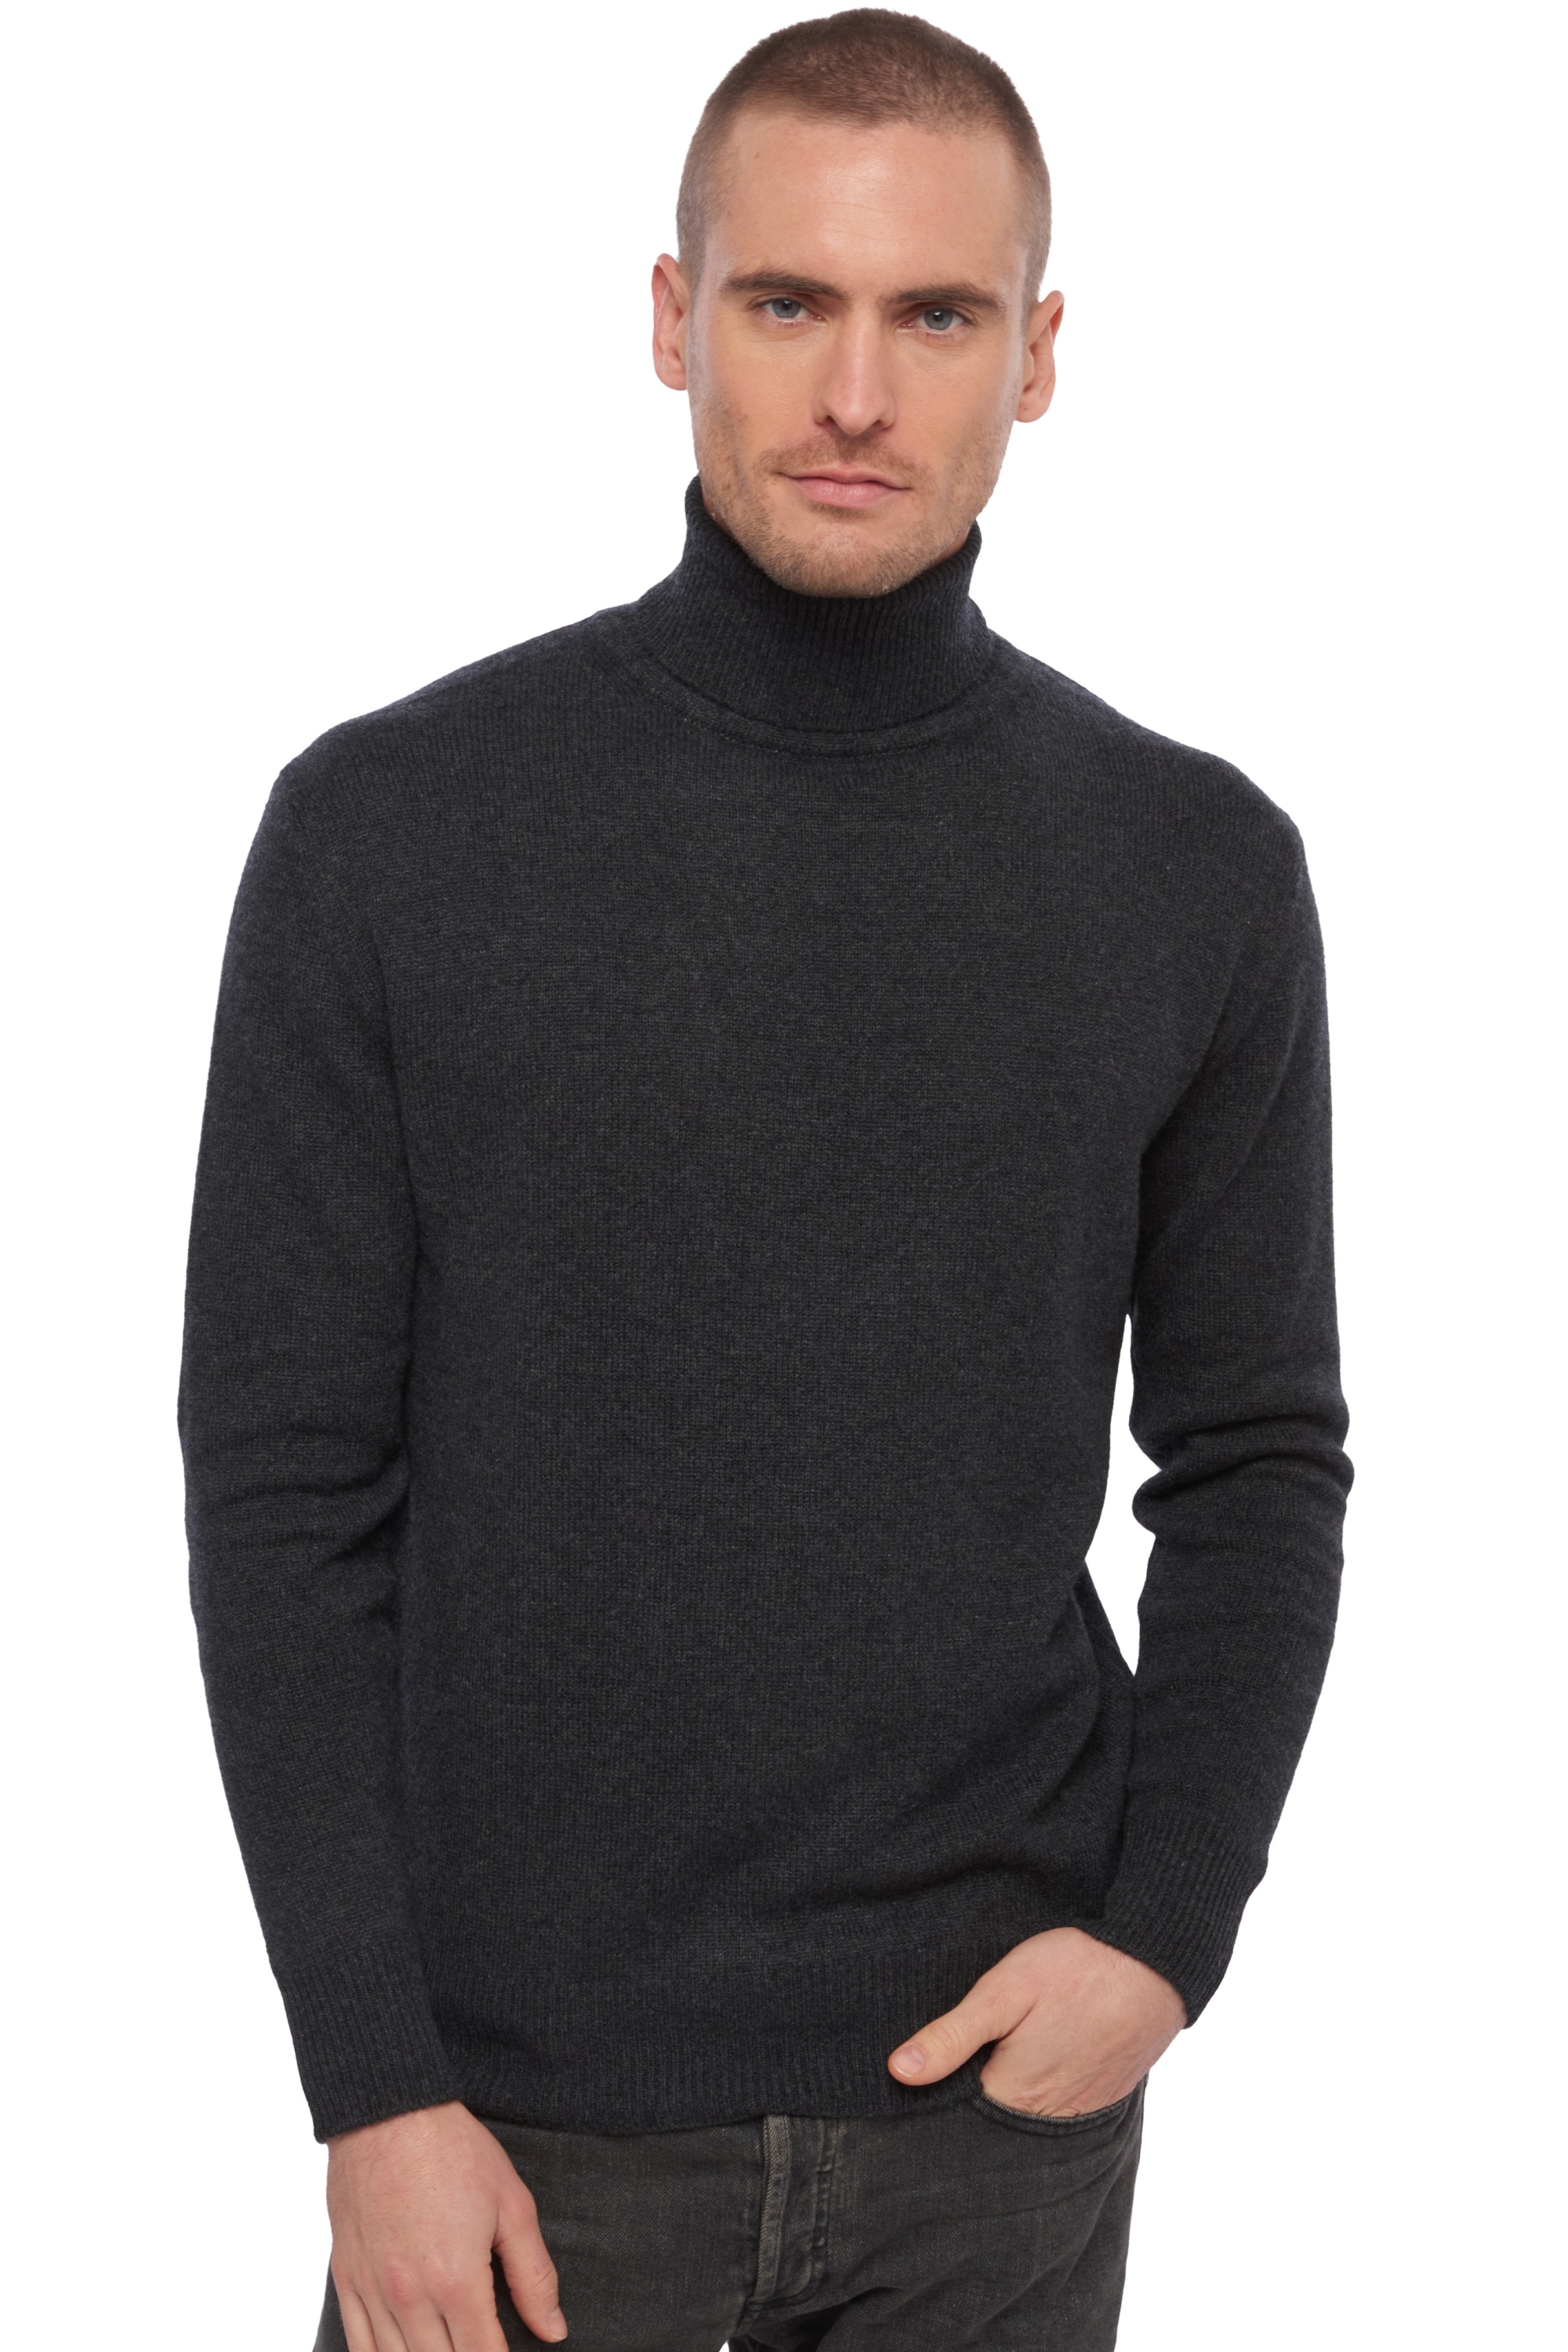 Cachemire pull homme col roule edgar 4f anthracite chine 3xl